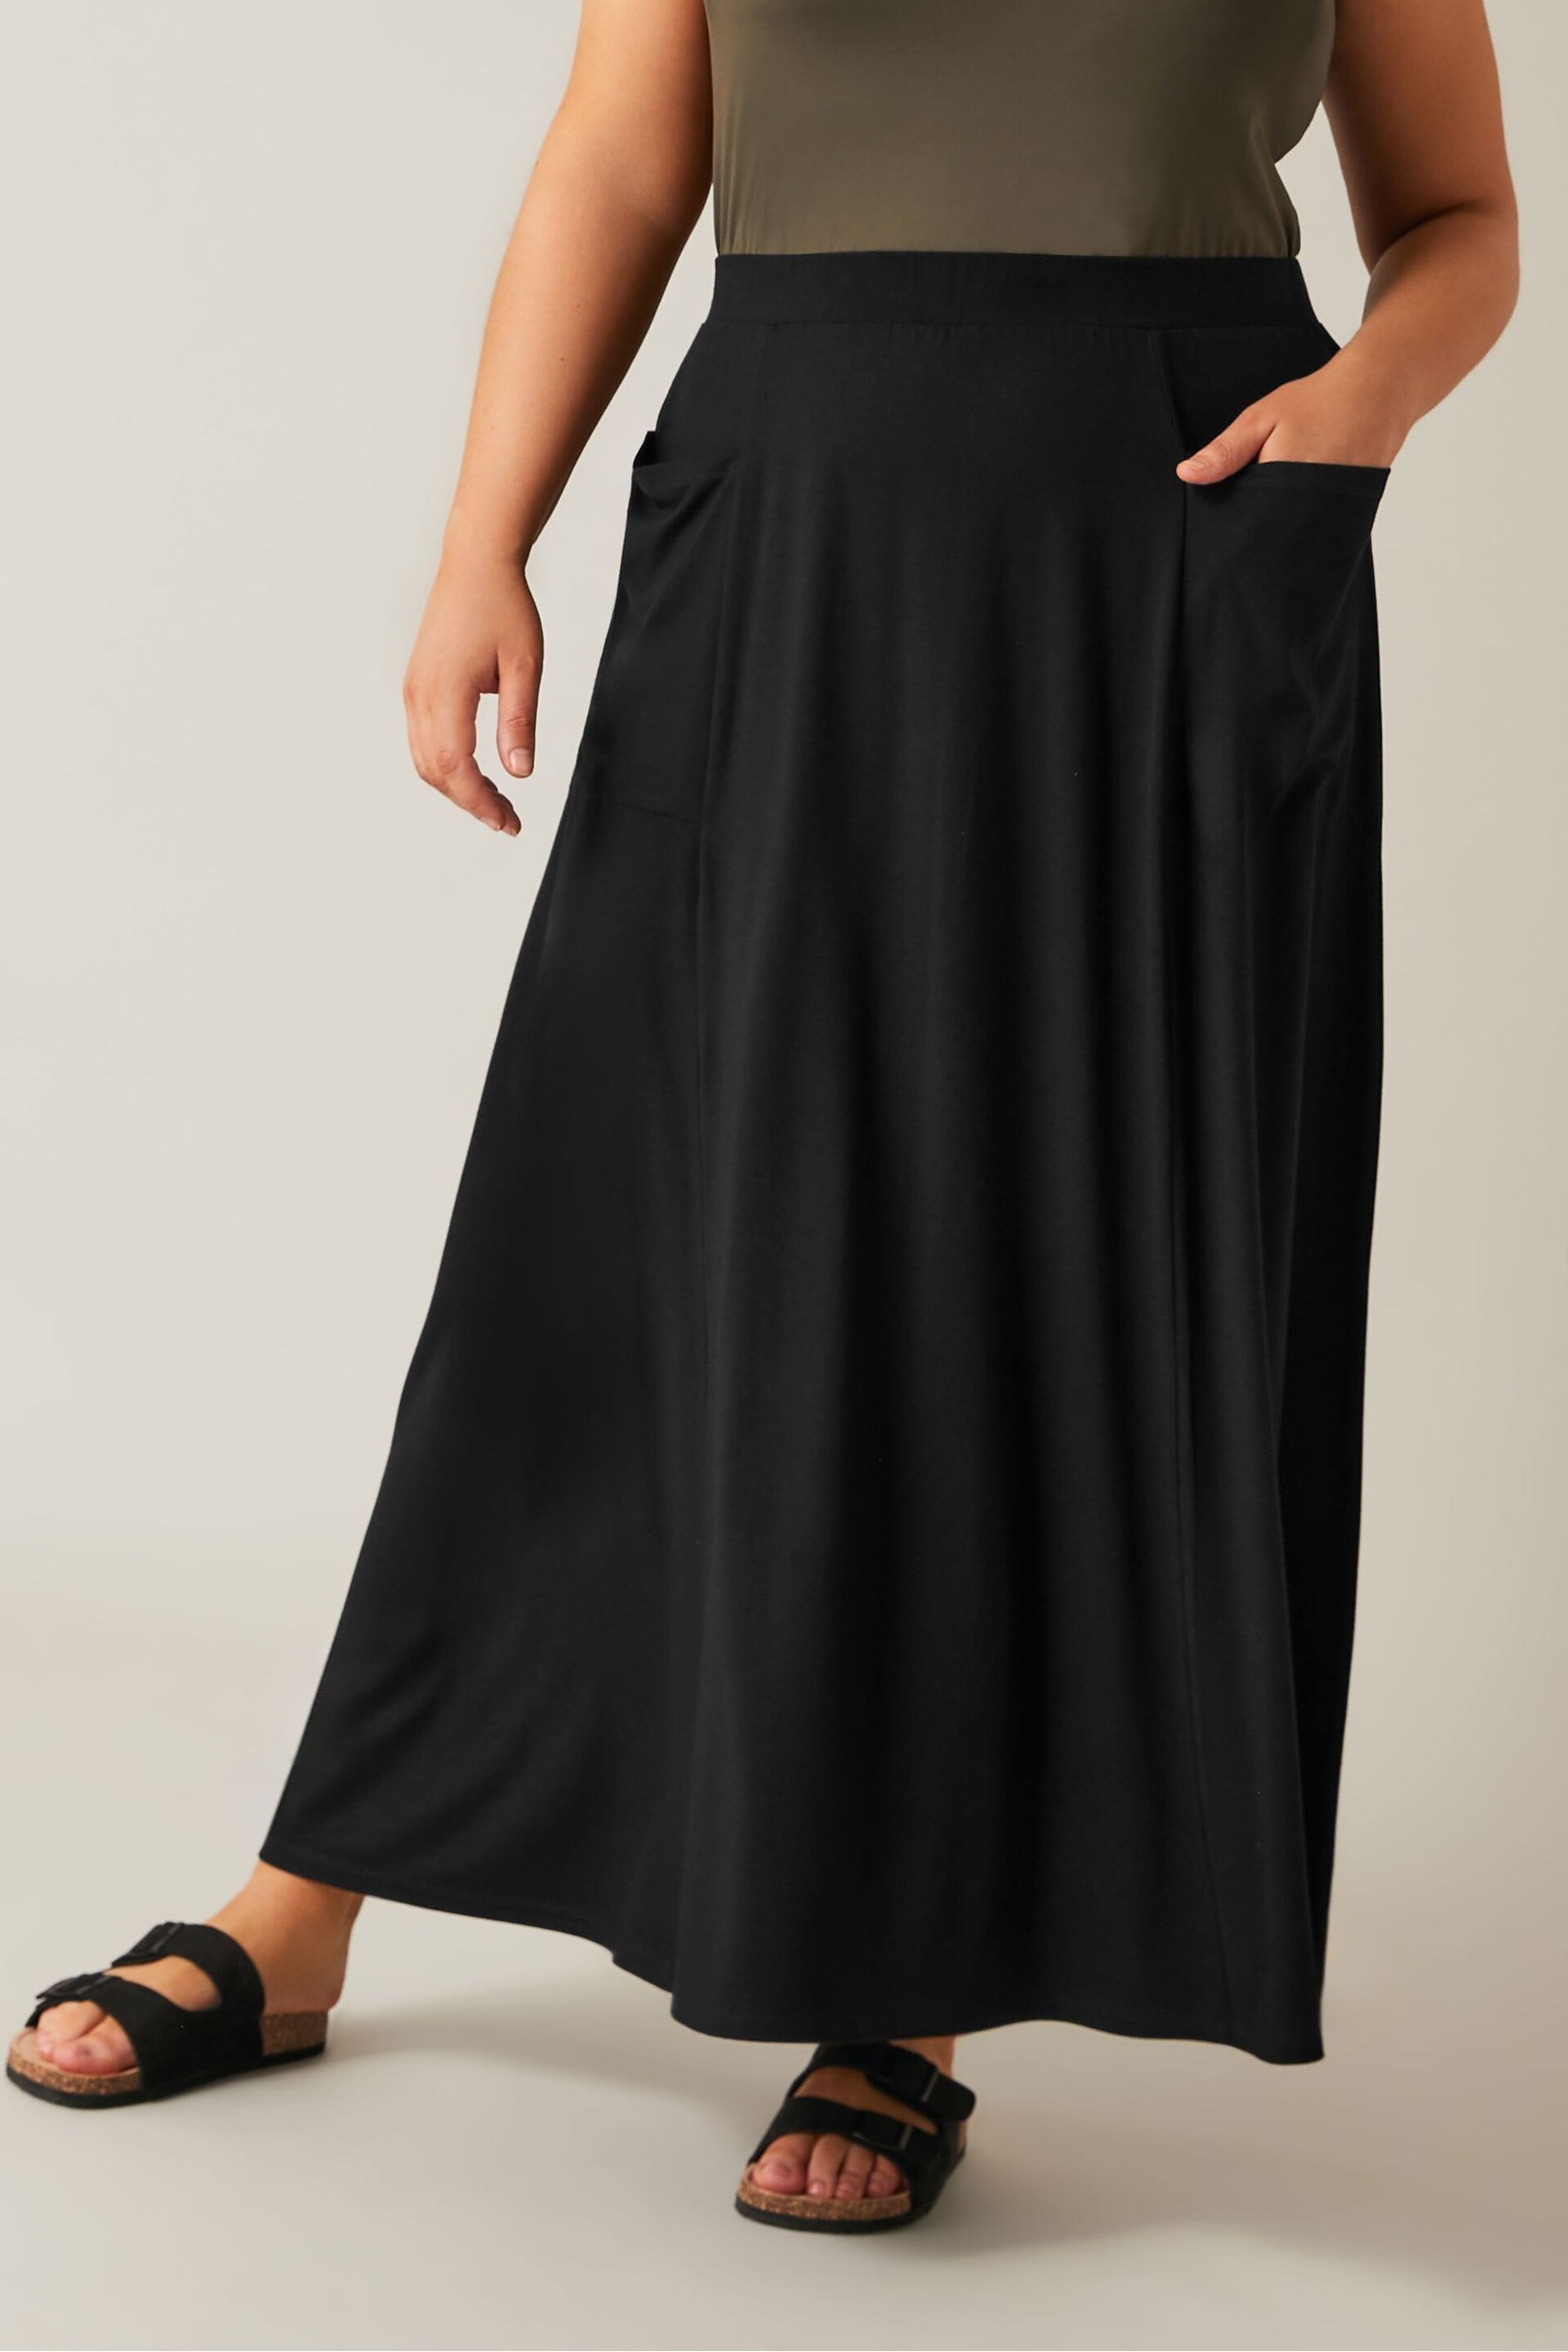 Evans Curve Maxi Skirt - Image 1 of 4